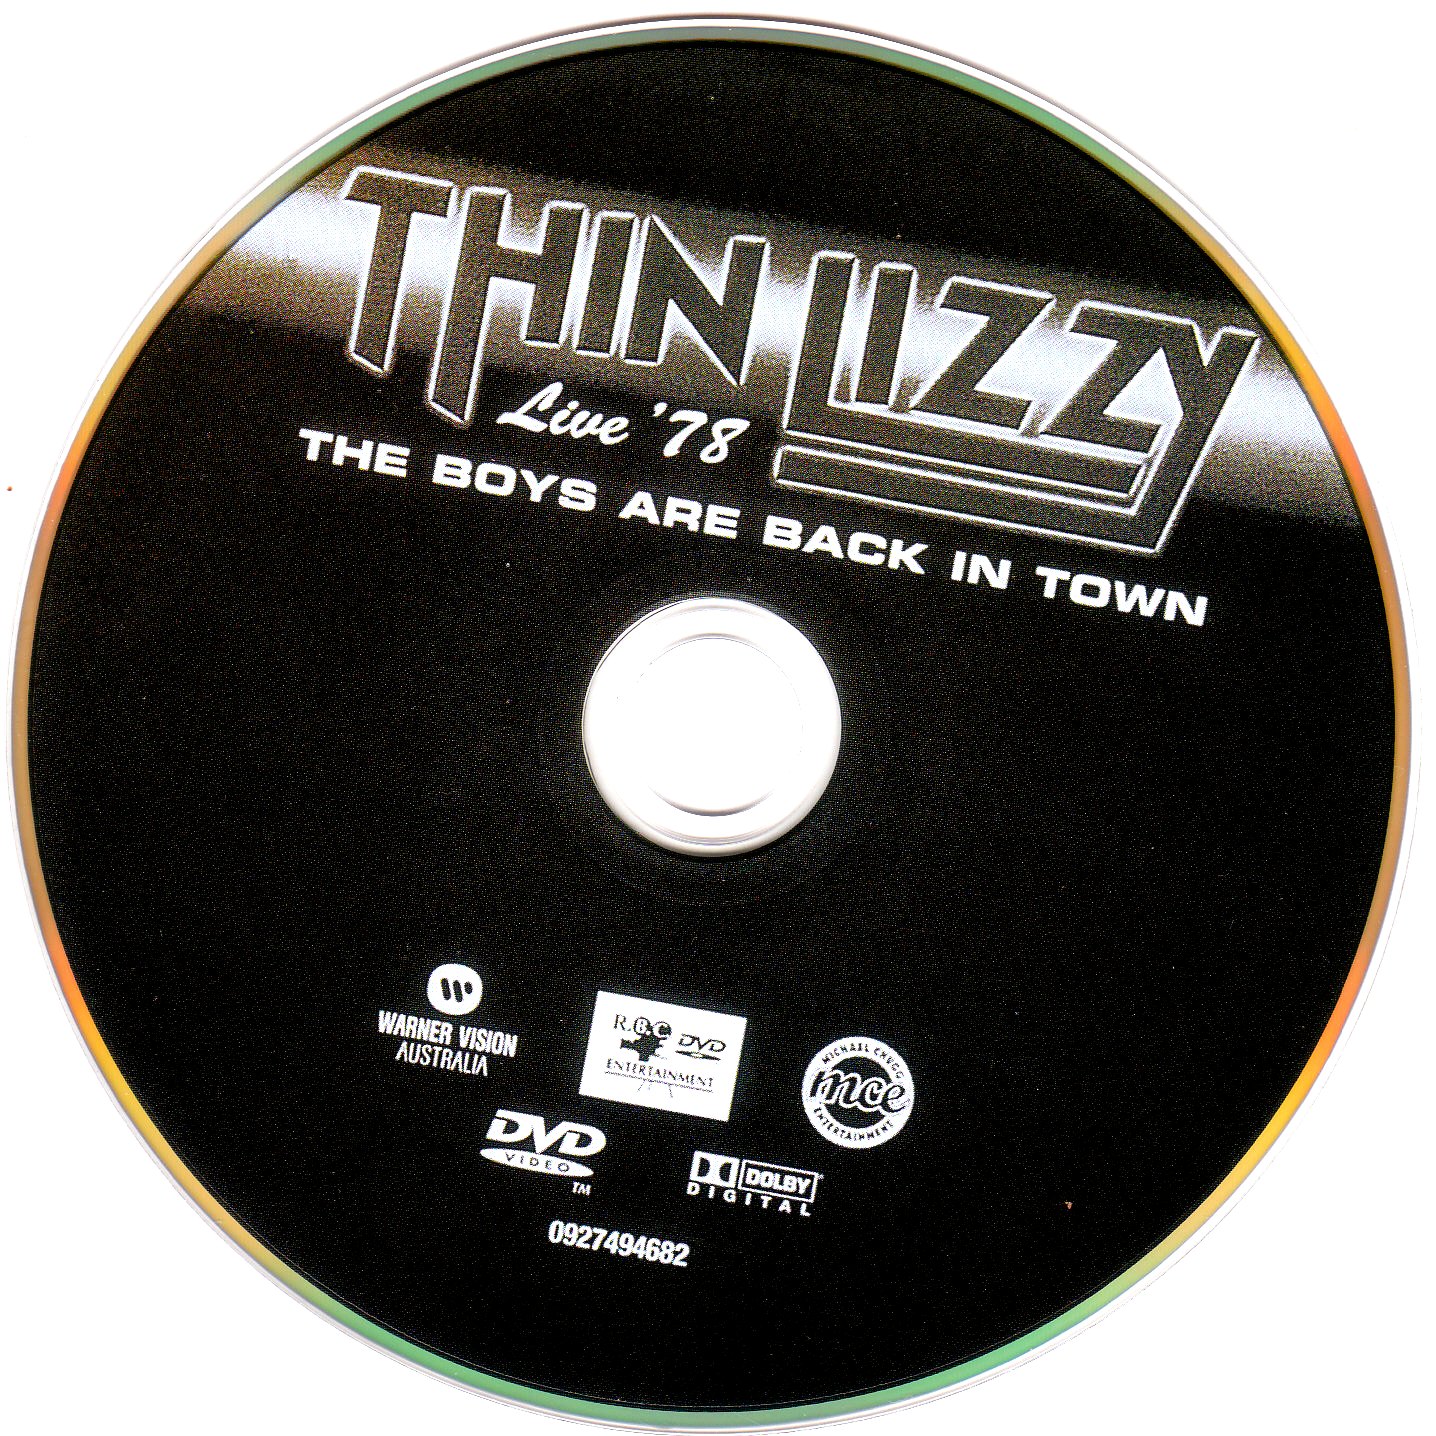 Thin Lizzy Live 78 The boys are back in town